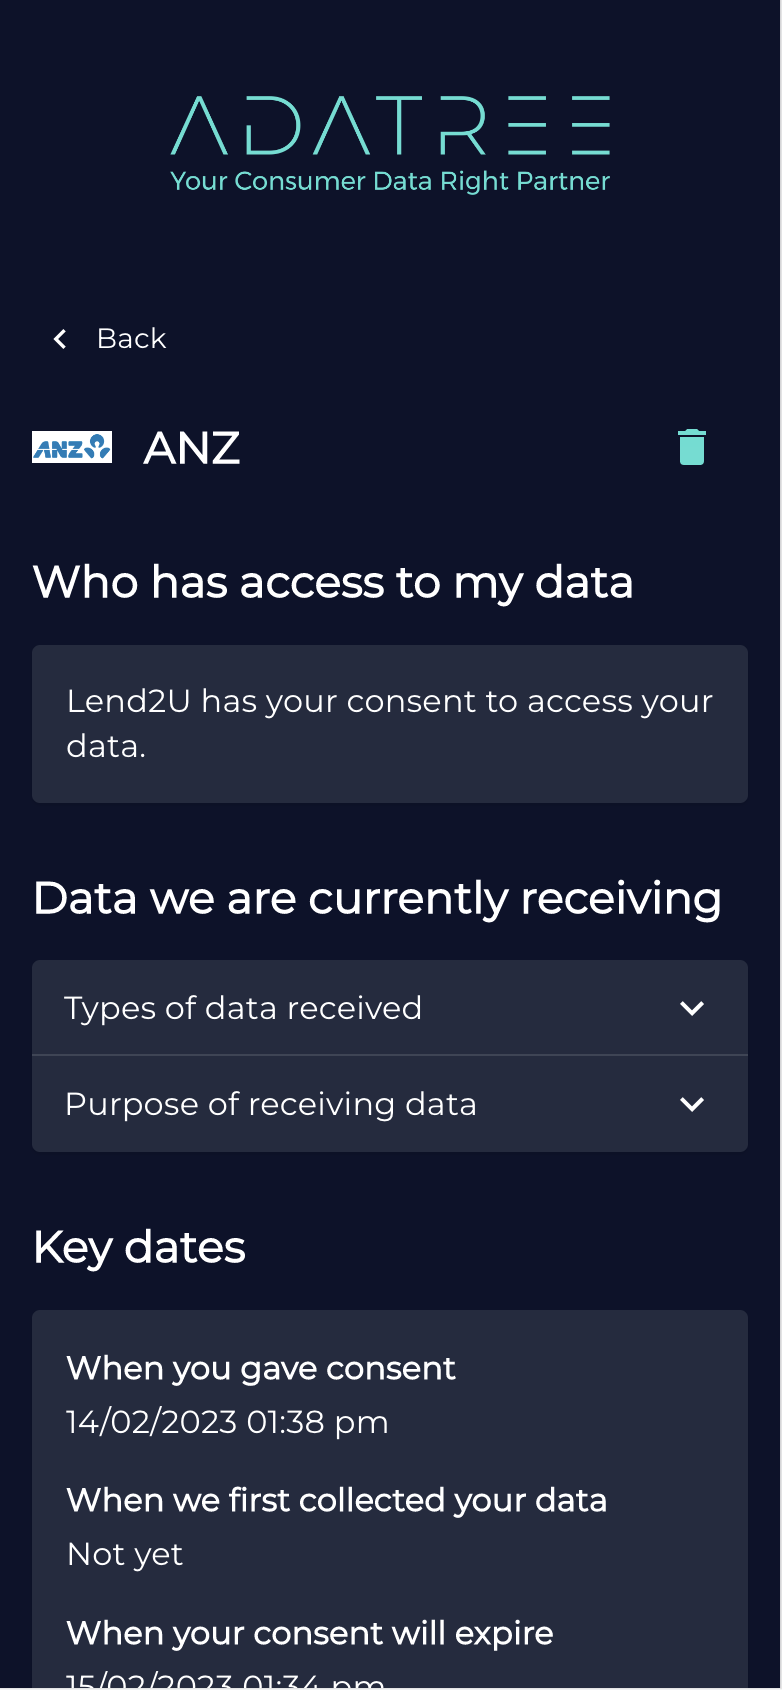 The final consent dashboard that shows which data points the consumer has consented to sharing.